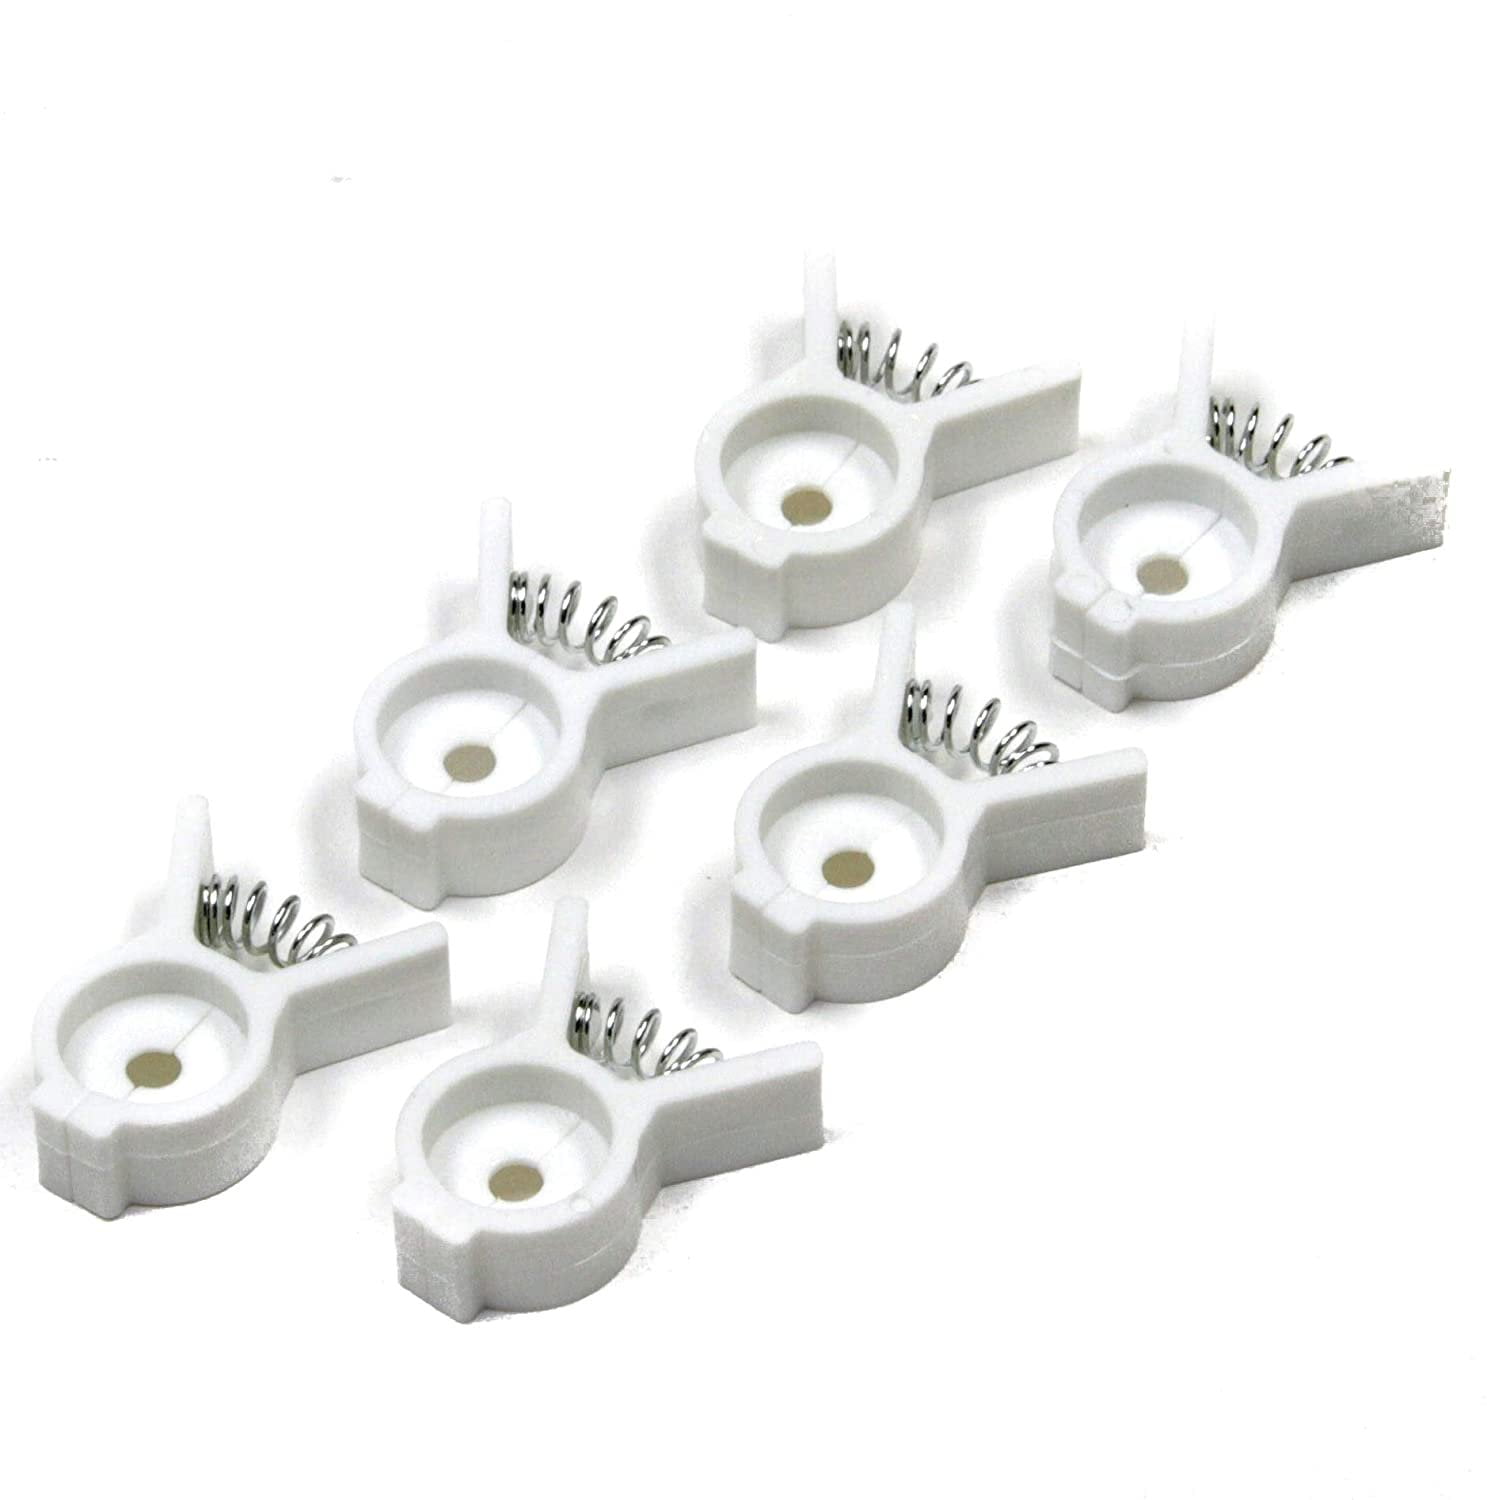 EIKS 6pcs Bag Clips Snap Twist Tie Replacement for Food Fruit Bread Bag  Cinch Easy Squeeze & Lock